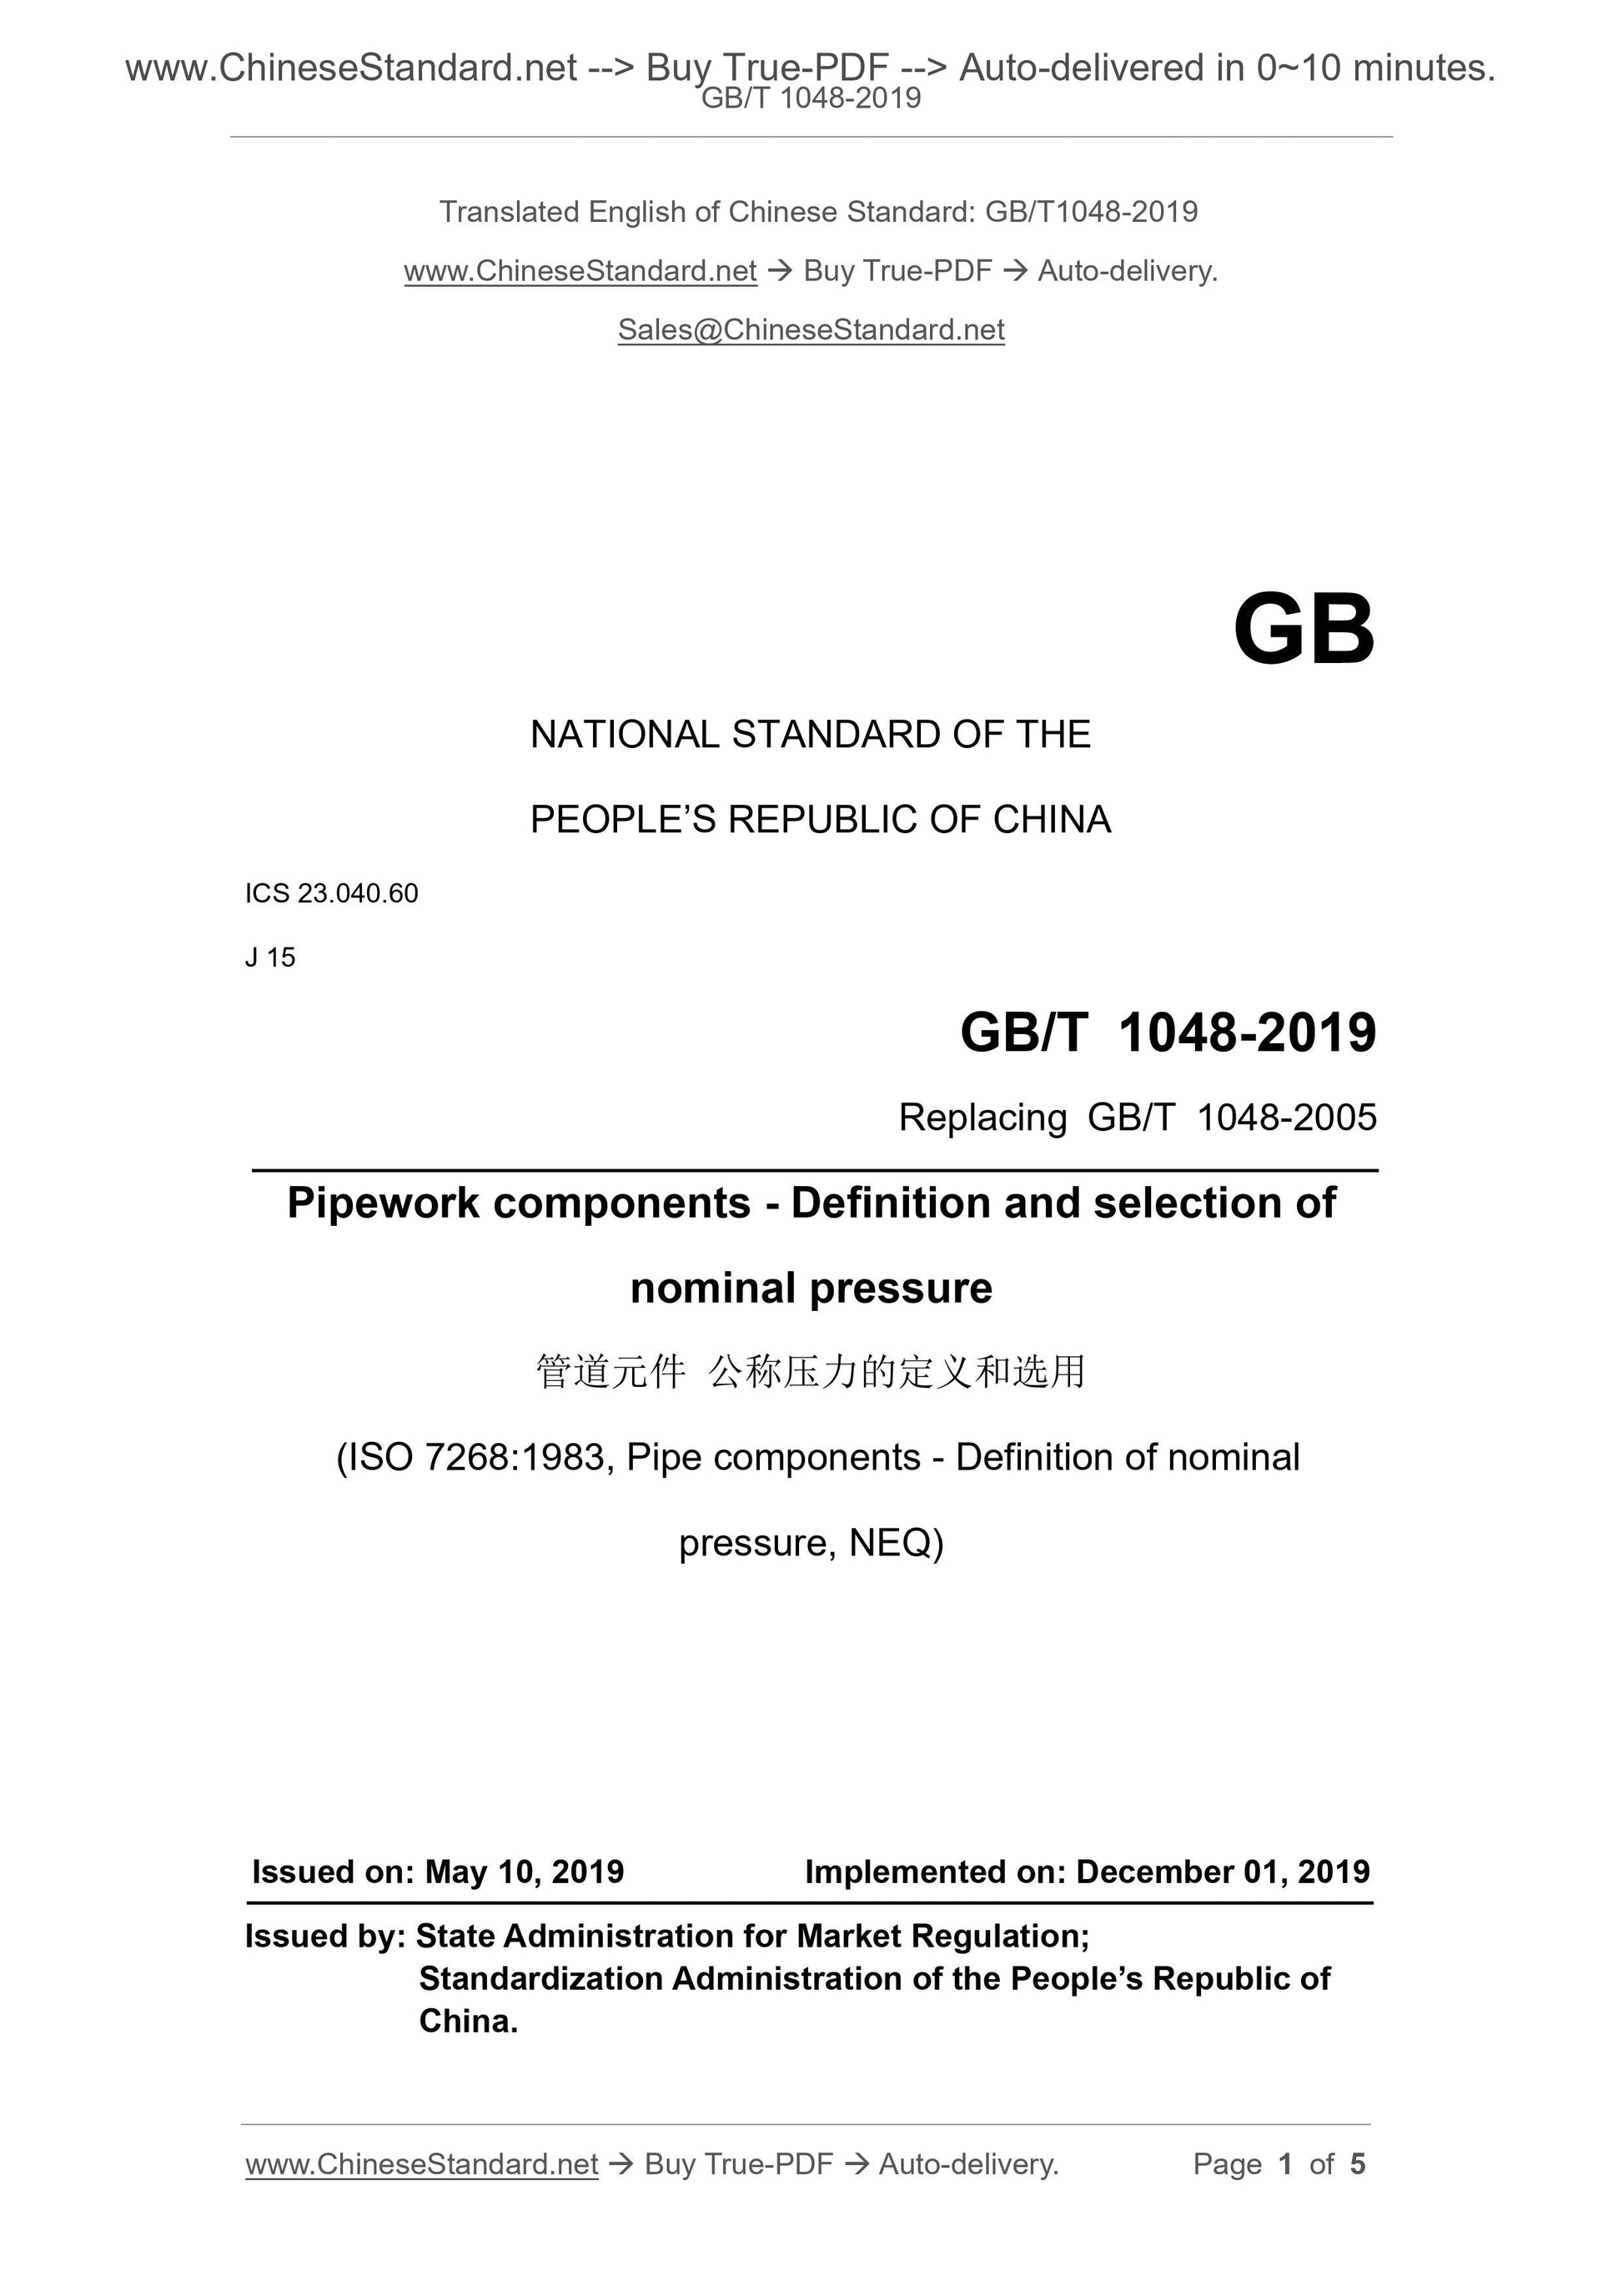 GB/T 1048-2019 Page 1